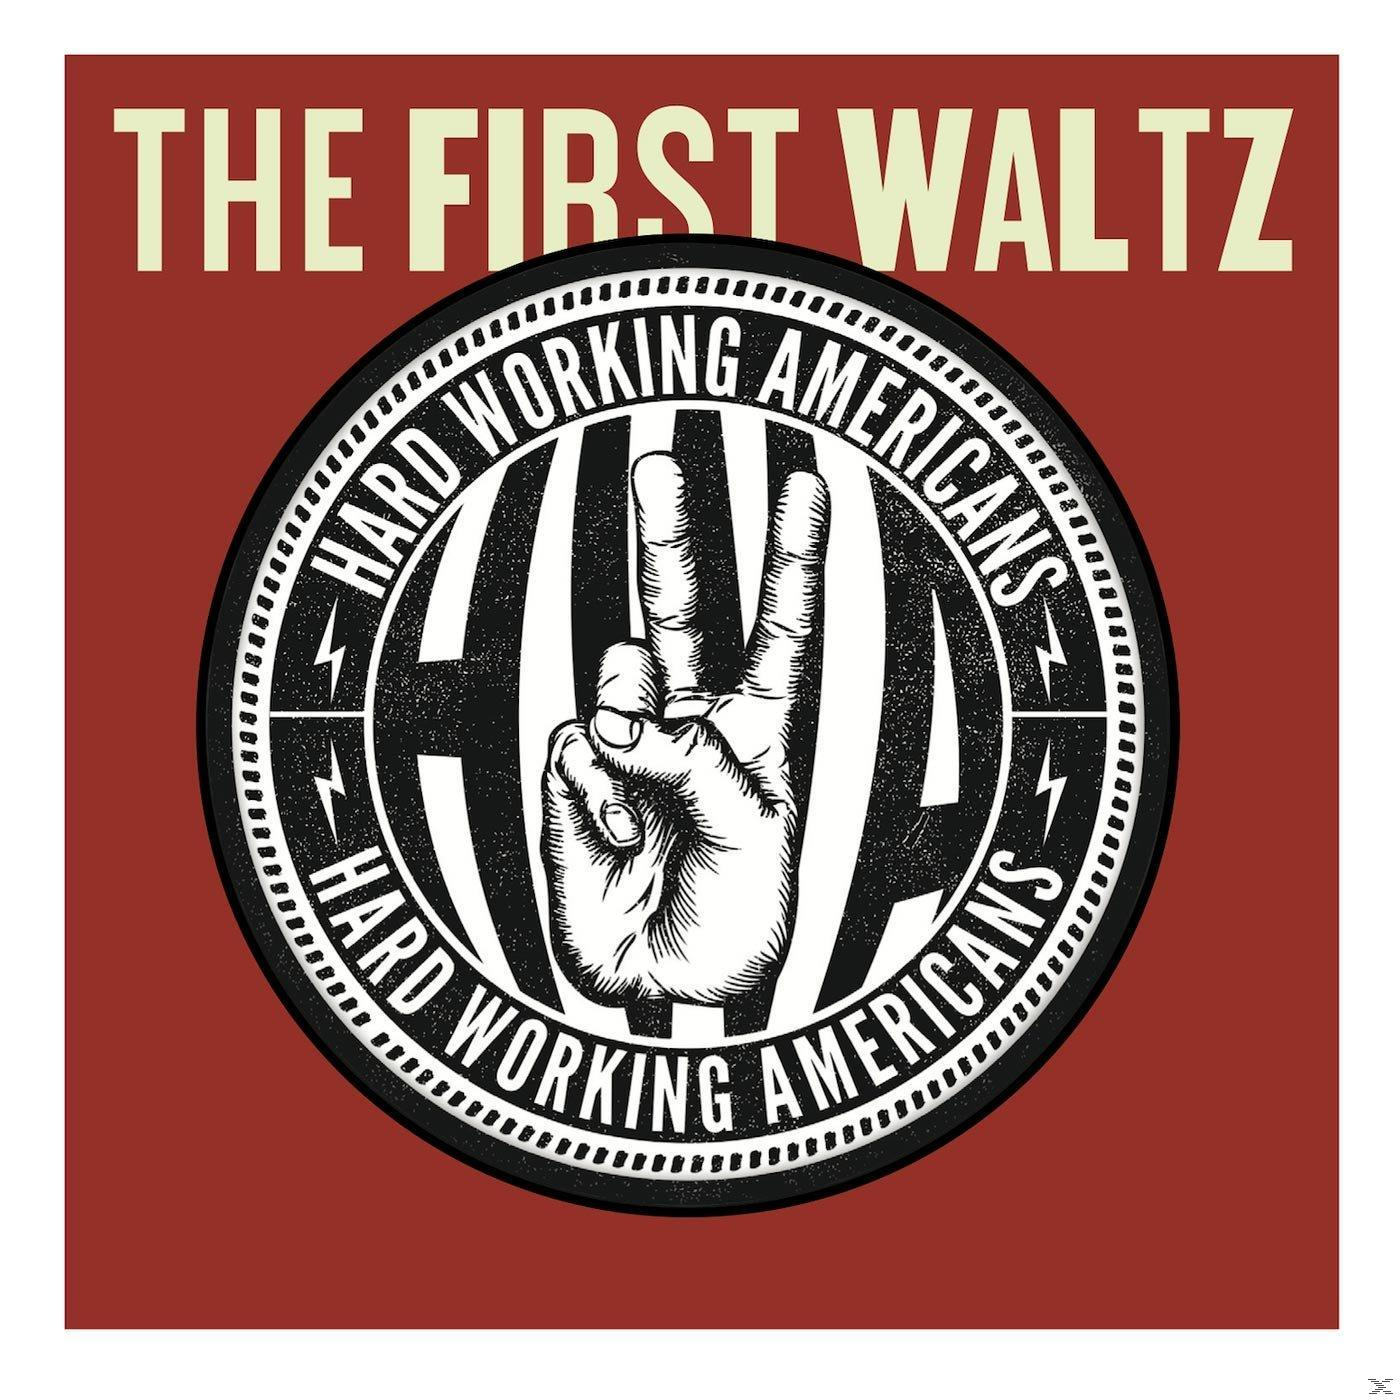 - (CD) Working - First Hard Americans The Waltz (CD+DVD)